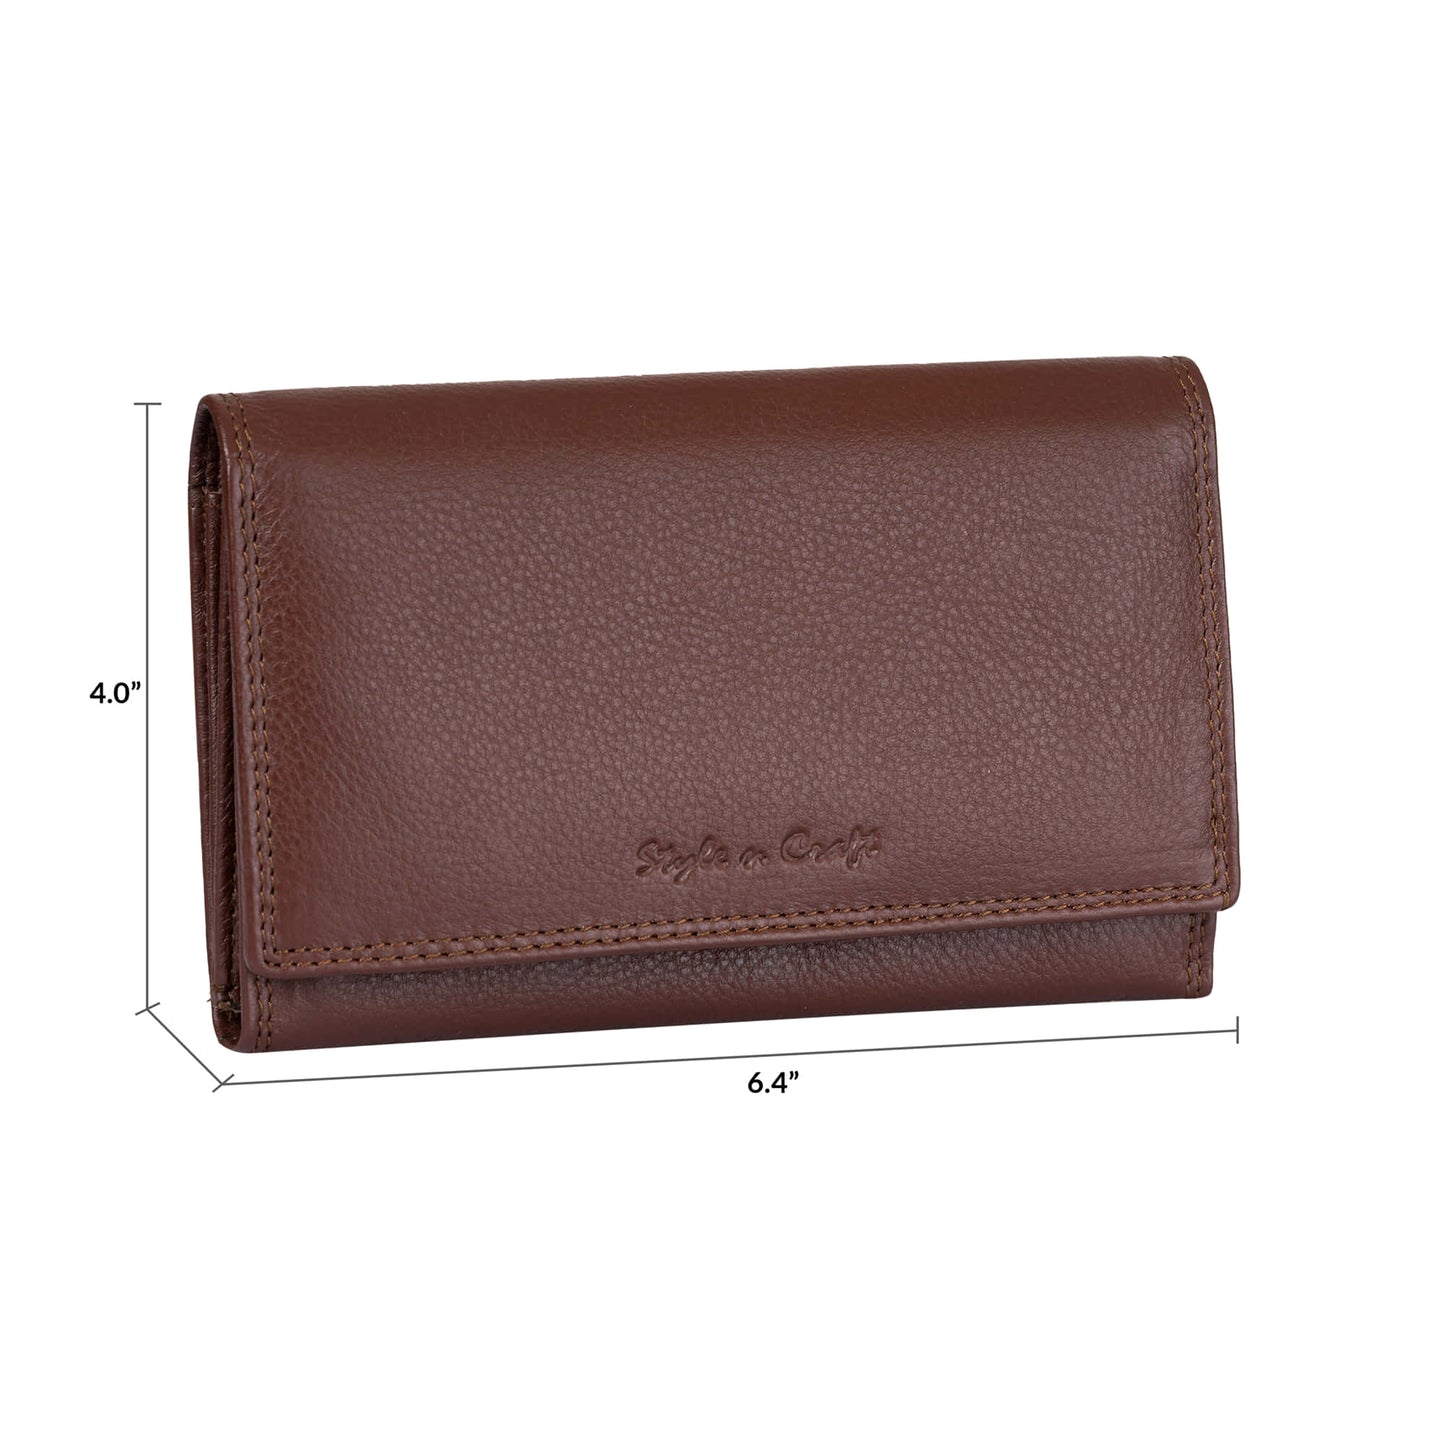 Style n Craft 391102 Ladies Clutch Wallet in Brown Full Grain Leather - Front View Showing Dimensions